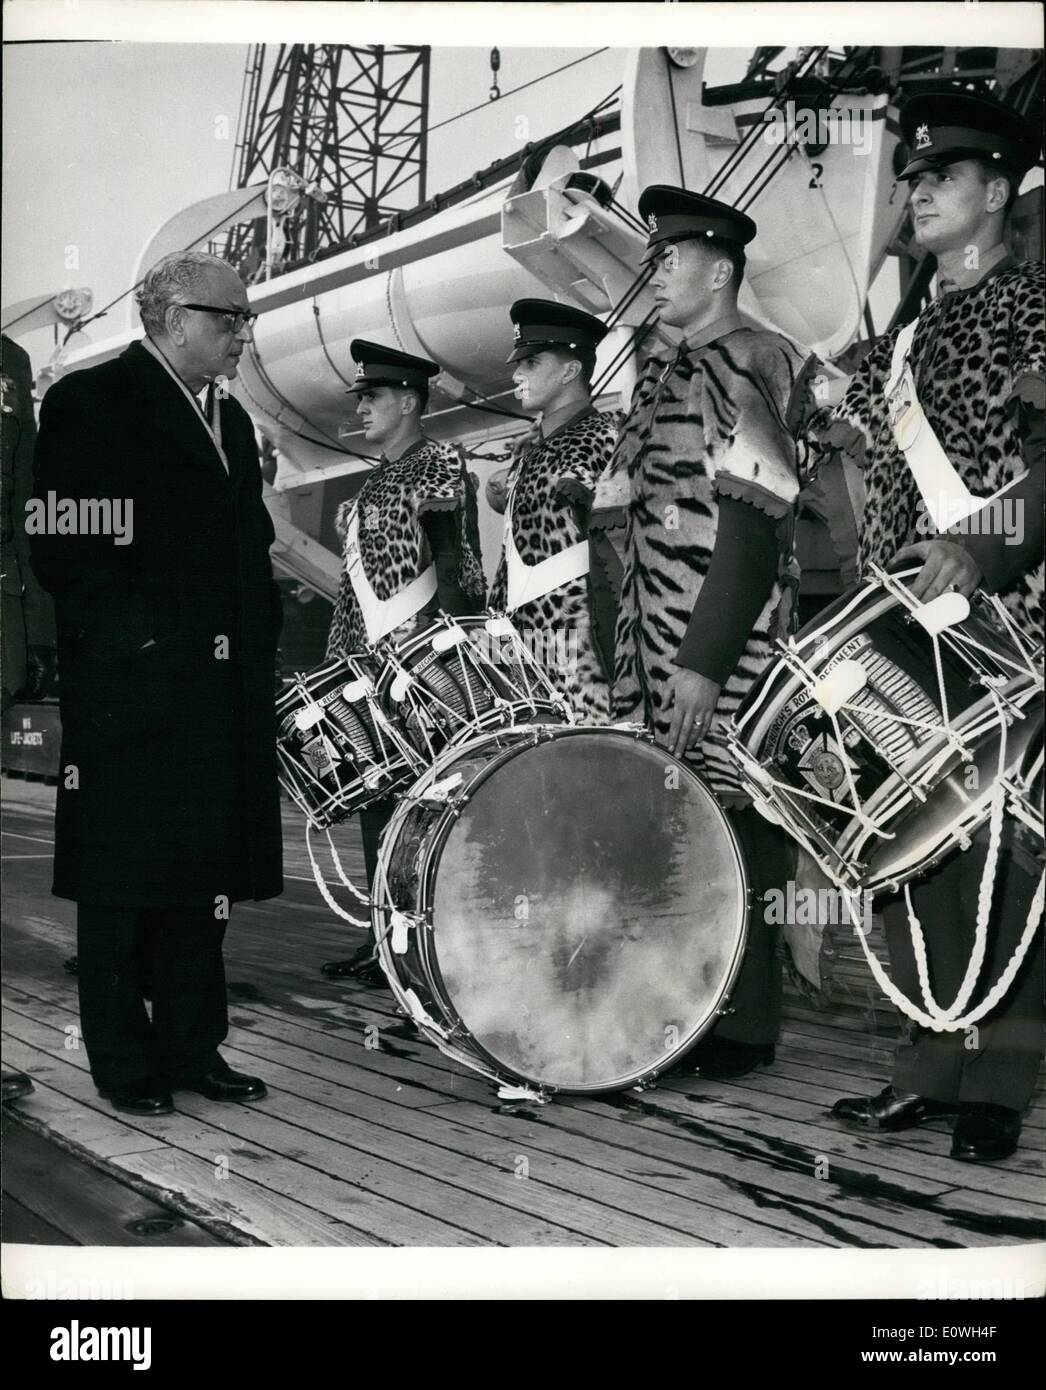 Dec. 12, 1962 - Tiger and Panther Skins From Mr. Nehru - For The Duke of Edinburgh's Royal Regiment.. At a ceremony aboard the T.S. Oxfordshire at Southampton - five tiger and panther skins were handed over by Mr. M.C. Chagla, the Indian High Commissioner in London - on behalf of Mr. Nehru - to the 1st. Bn. Duke of Edinburgh a Royal Regiment.. They were sent at the instigation of former Sgt. Major Leslie Hodges - for use by the Regimental drummers - as he thought the original skins were getting rather 'tatty'.. Keystone Photo Shows:- The High Commissioner - Mr Stock Photo